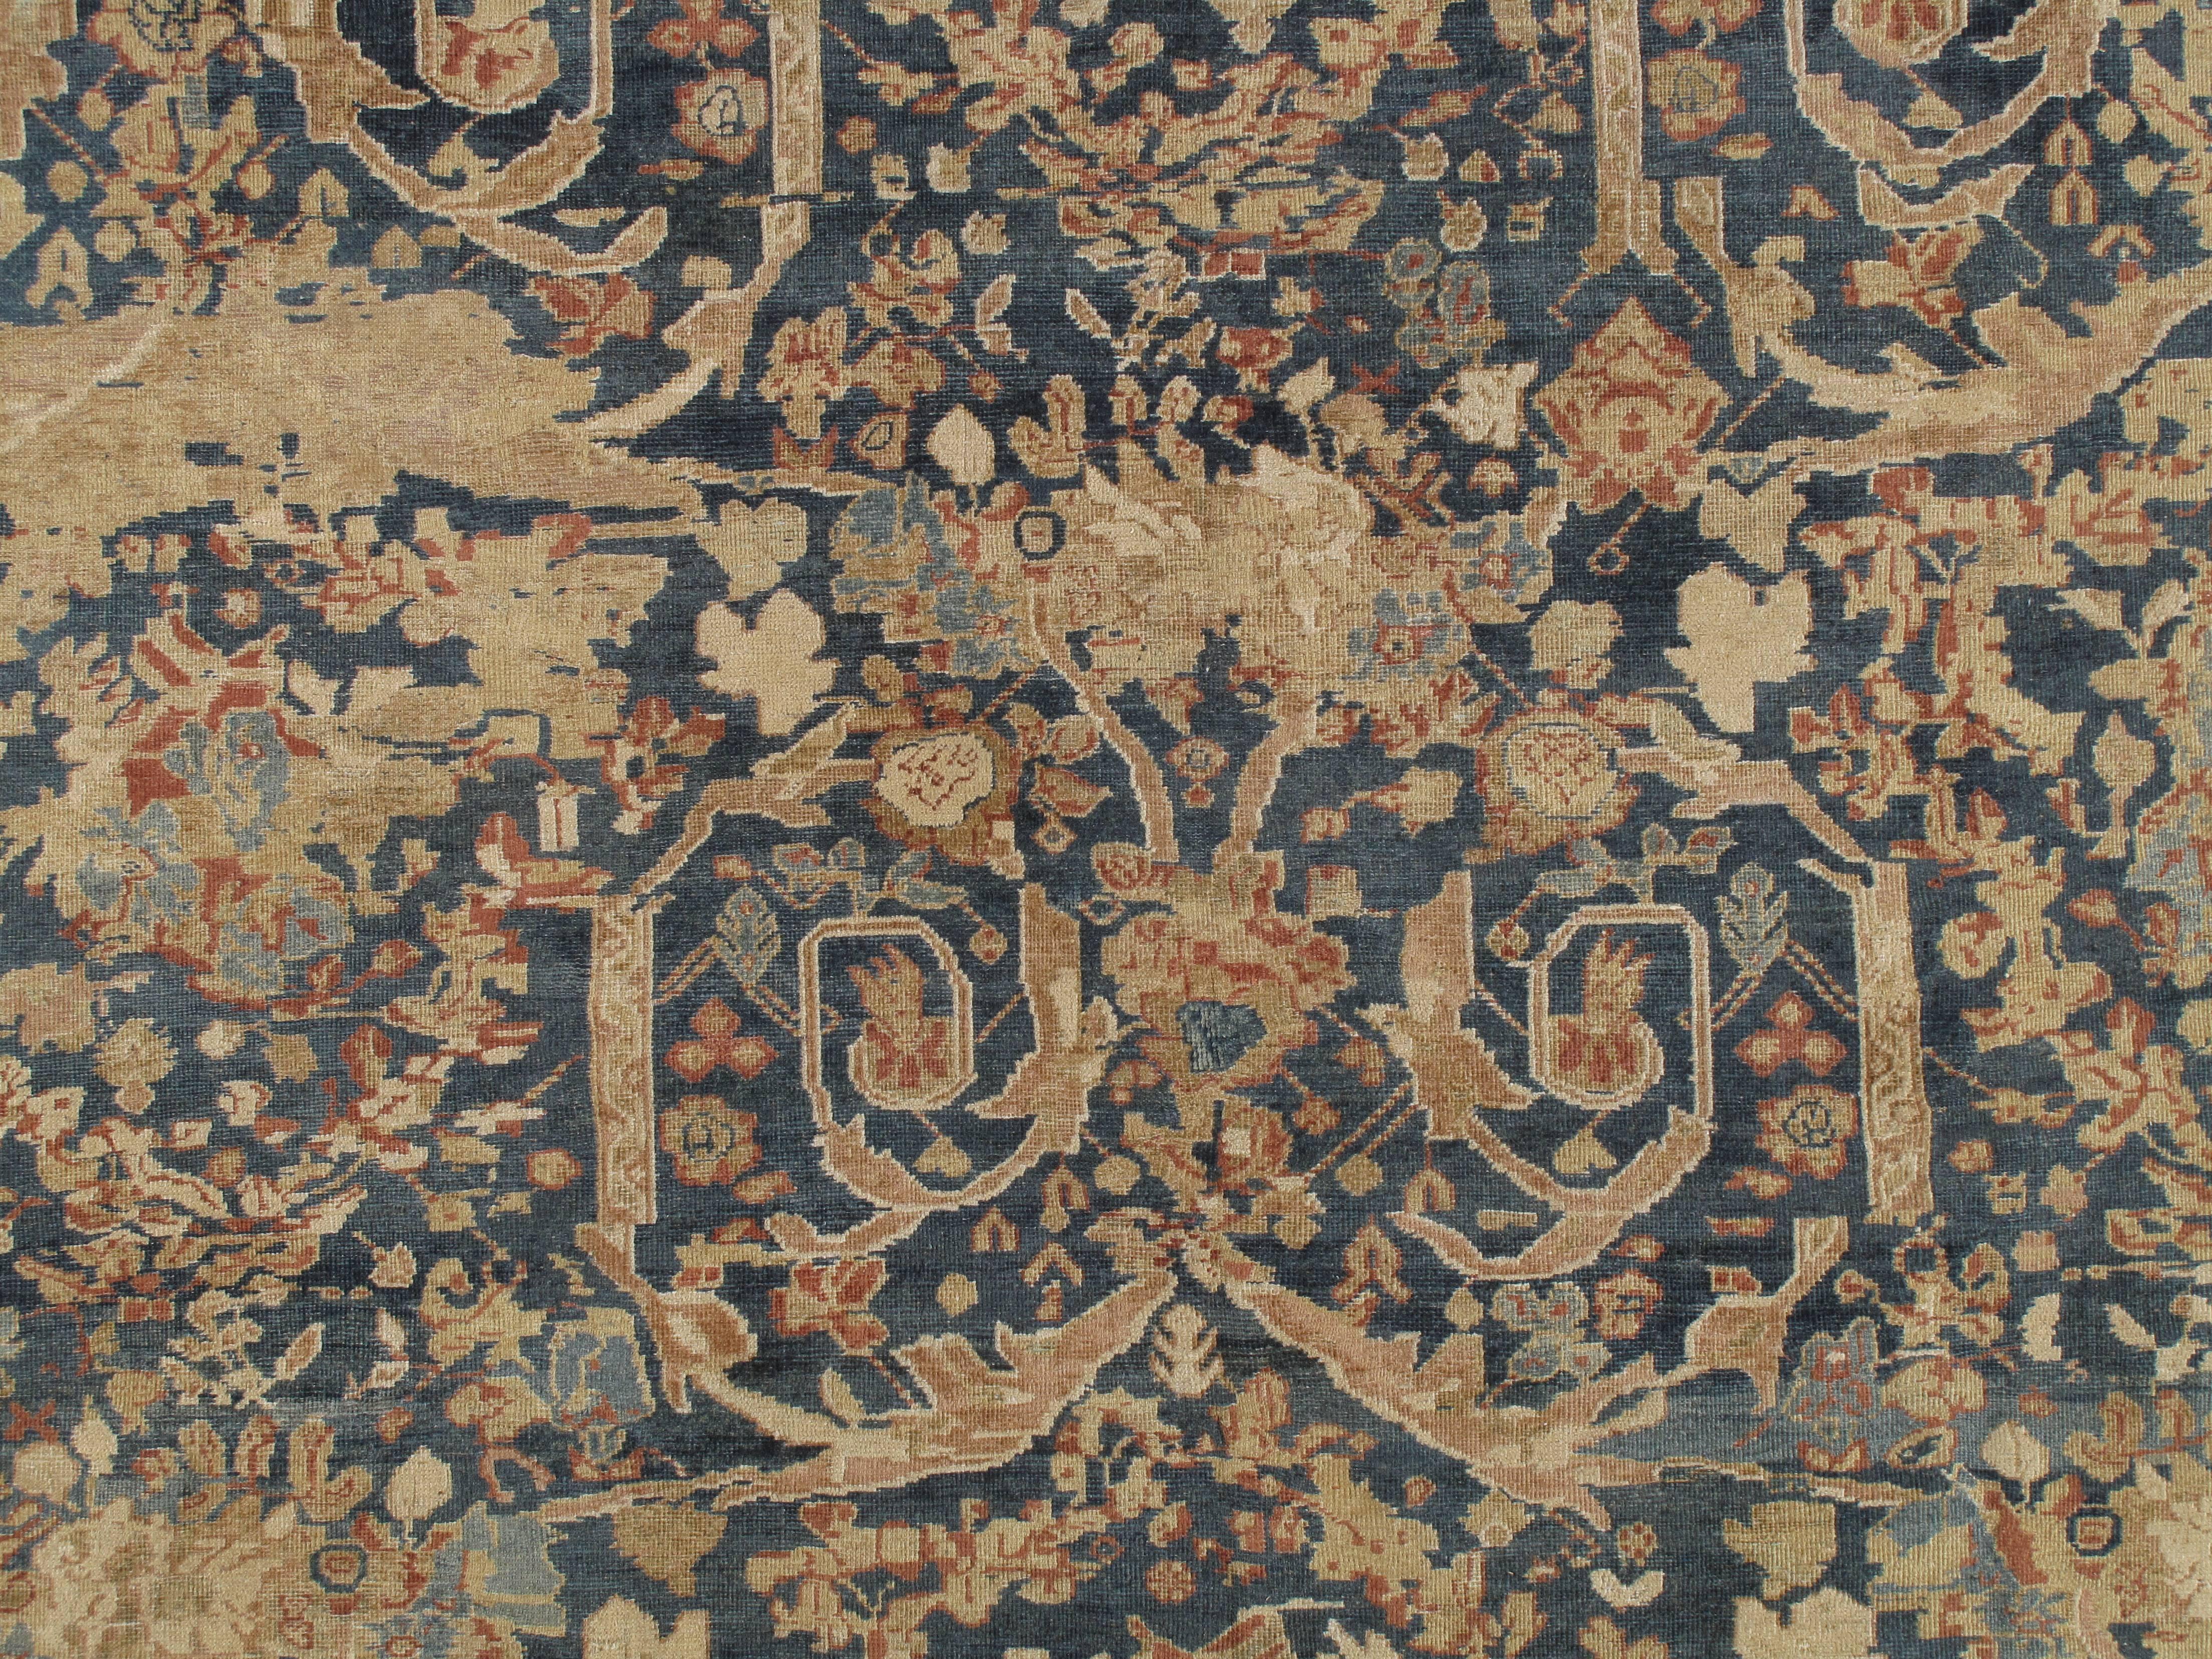 Hand-Knotted Antique Sultanabad Carpet, Persian Handmade Wool Rug, Soft Navy, Light Blue Ivor